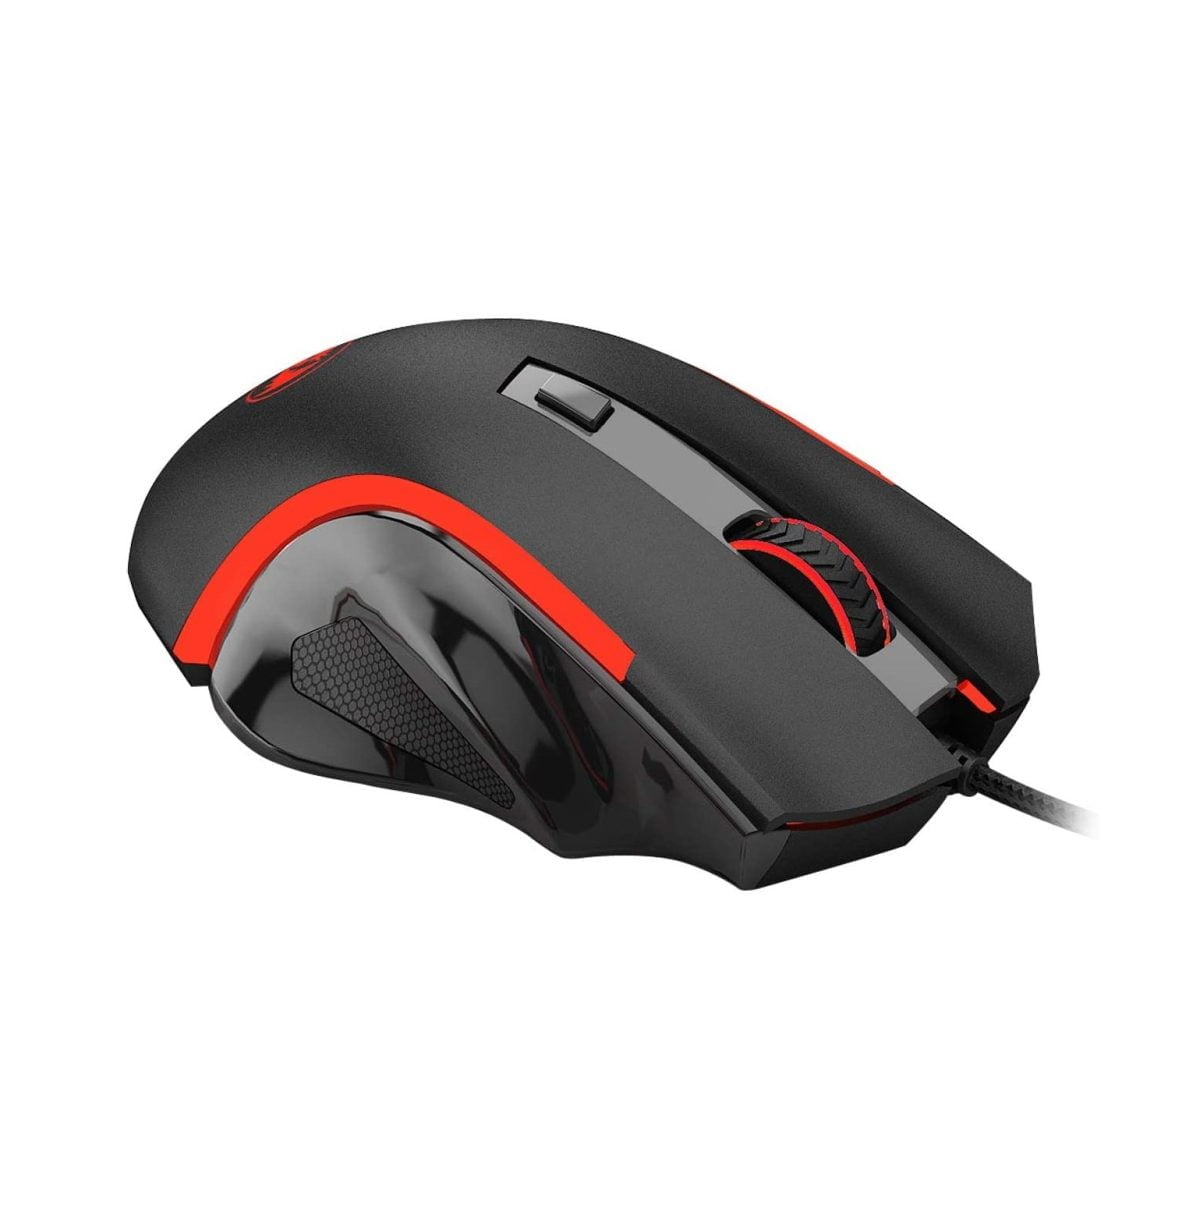 61Mjmblfnol. Ac Sl1500 Redragon &Lt;H1 Id=&Quot;Title&Quot; Class=&Quot;A-Size-Large A-Spacing-None&Quot;&Gt;Redragon M606 Nothosaur Usb Gaming Mouse&Lt;/H1&Gt; &Lt;Table Class=&Quot;A-Normal A-Spacing-Micro&Quot;&Gt; &Lt;Tbody&Gt; &Lt;Tr Class=&Quot;A-Spacing-Small Po-Connectivity_Technology&Quot;&Gt; &Lt;Td Class=&Quot;A-Span3&Quot;&Gt;&Lt;Span Class=&Quot;A-Size-Base A-Text-Bold&Quot;&Gt;Connectivity Technology&Lt;/Span&Gt;&Lt;/Td&Gt; &Lt;Td Class=&Quot;A-Span9&Quot;&Gt;&Lt;Span Class=&Quot;A-Size-Base&Quot;&Gt;Usb&Lt;/Span&Gt;&Lt;/Td&Gt; &Lt;/Tr&Gt; &Lt;Tr Class=&Quot;A-Spacing-Small Po-Recommended_Uses_For_Product&Quot;&Gt; &Lt;Td Class=&Quot;A-Span3&Quot;&Gt;&Lt;Span Class=&Quot;A-Size-Base A-Text-Bold&Quot;&Gt;Recommended Uses For Product&Lt;/Span&Gt;&Lt;/Td&Gt; &Lt;Td Class=&Quot;A-Span9&Quot;&Gt;&Lt;Span Class=&Quot;A-Size-Base&Quot;&Gt;Gaming&Lt;/Span&Gt;&Lt;/Td&Gt; &Lt;/Tr&Gt; &Lt;Tr Class=&Quot;A-Spacing-Small Po-Brand&Quot;&Gt; &Lt;Td Class=&Quot;A-Span3&Quot;&Gt;&Lt;Span Class=&Quot;A-Size-Base A-Text-Bold&Quot;&Gt;Brand&Lt;/Span&Gt;&Lt;/Td&Gt; &Lt;Td Class=&Quot;A-Span9&Quot;&Gt;&Lt;Span Class=&Quot;A-Size-Base&Quot;&Gt;Redragon&Lt;/Span&Gt;&Lt;/Td&Gt; &Lt;/Tr&Gt; &Lt;Tr Class=&Quot;A-Spacing-Small Po-Movement_Detection_Technology&Quot;&Gt; &Lt;Td Class=&Quot;A-Span3&Quot;&Gt;&Lt;Span Class=&Quot;A-Size-Base A-Text-Bold&Quot;&Gt;Movement Detection Technology&Lt;/Span&Gt;&Lt;/Td&Gt; &Lt;Td Class=&Quot;A-Span9&Quot;&Gt;&Lt;Span Class=&Quot;A-Size-Base&Quot;&Gt;Optical&Lt;/Span&Gt;&Lt;/Td&Gt; &Lt;/Tr&Gt; &Lt;Tr Class=&Quot;A-Spacing-Small Po-Color&Quot;&Gt; &Lt;Td Class=&Quot;A-Span3&Quot;&Gt;&Lt;Span Class=&Quot;A-Size-Base A-Text-Bold&Quot;&Gt;Colour&Lt;/Span&Gt;&Lt;/Td&Gt; &Lt;Td Class=&Quot;A-Span9&Quot;&Gt;&Lt;Span Class=&Quot;A-Size-Base&Quot;&Gt;Black&Lt;/Span&Gt;&Lt;/Td&Gt; &Lt;/Tr&Gt; &Lt;/Tbody&Gt; &Lt;/Table&Gt; Gaming Mouse Redragon M606 Gaming Mouse